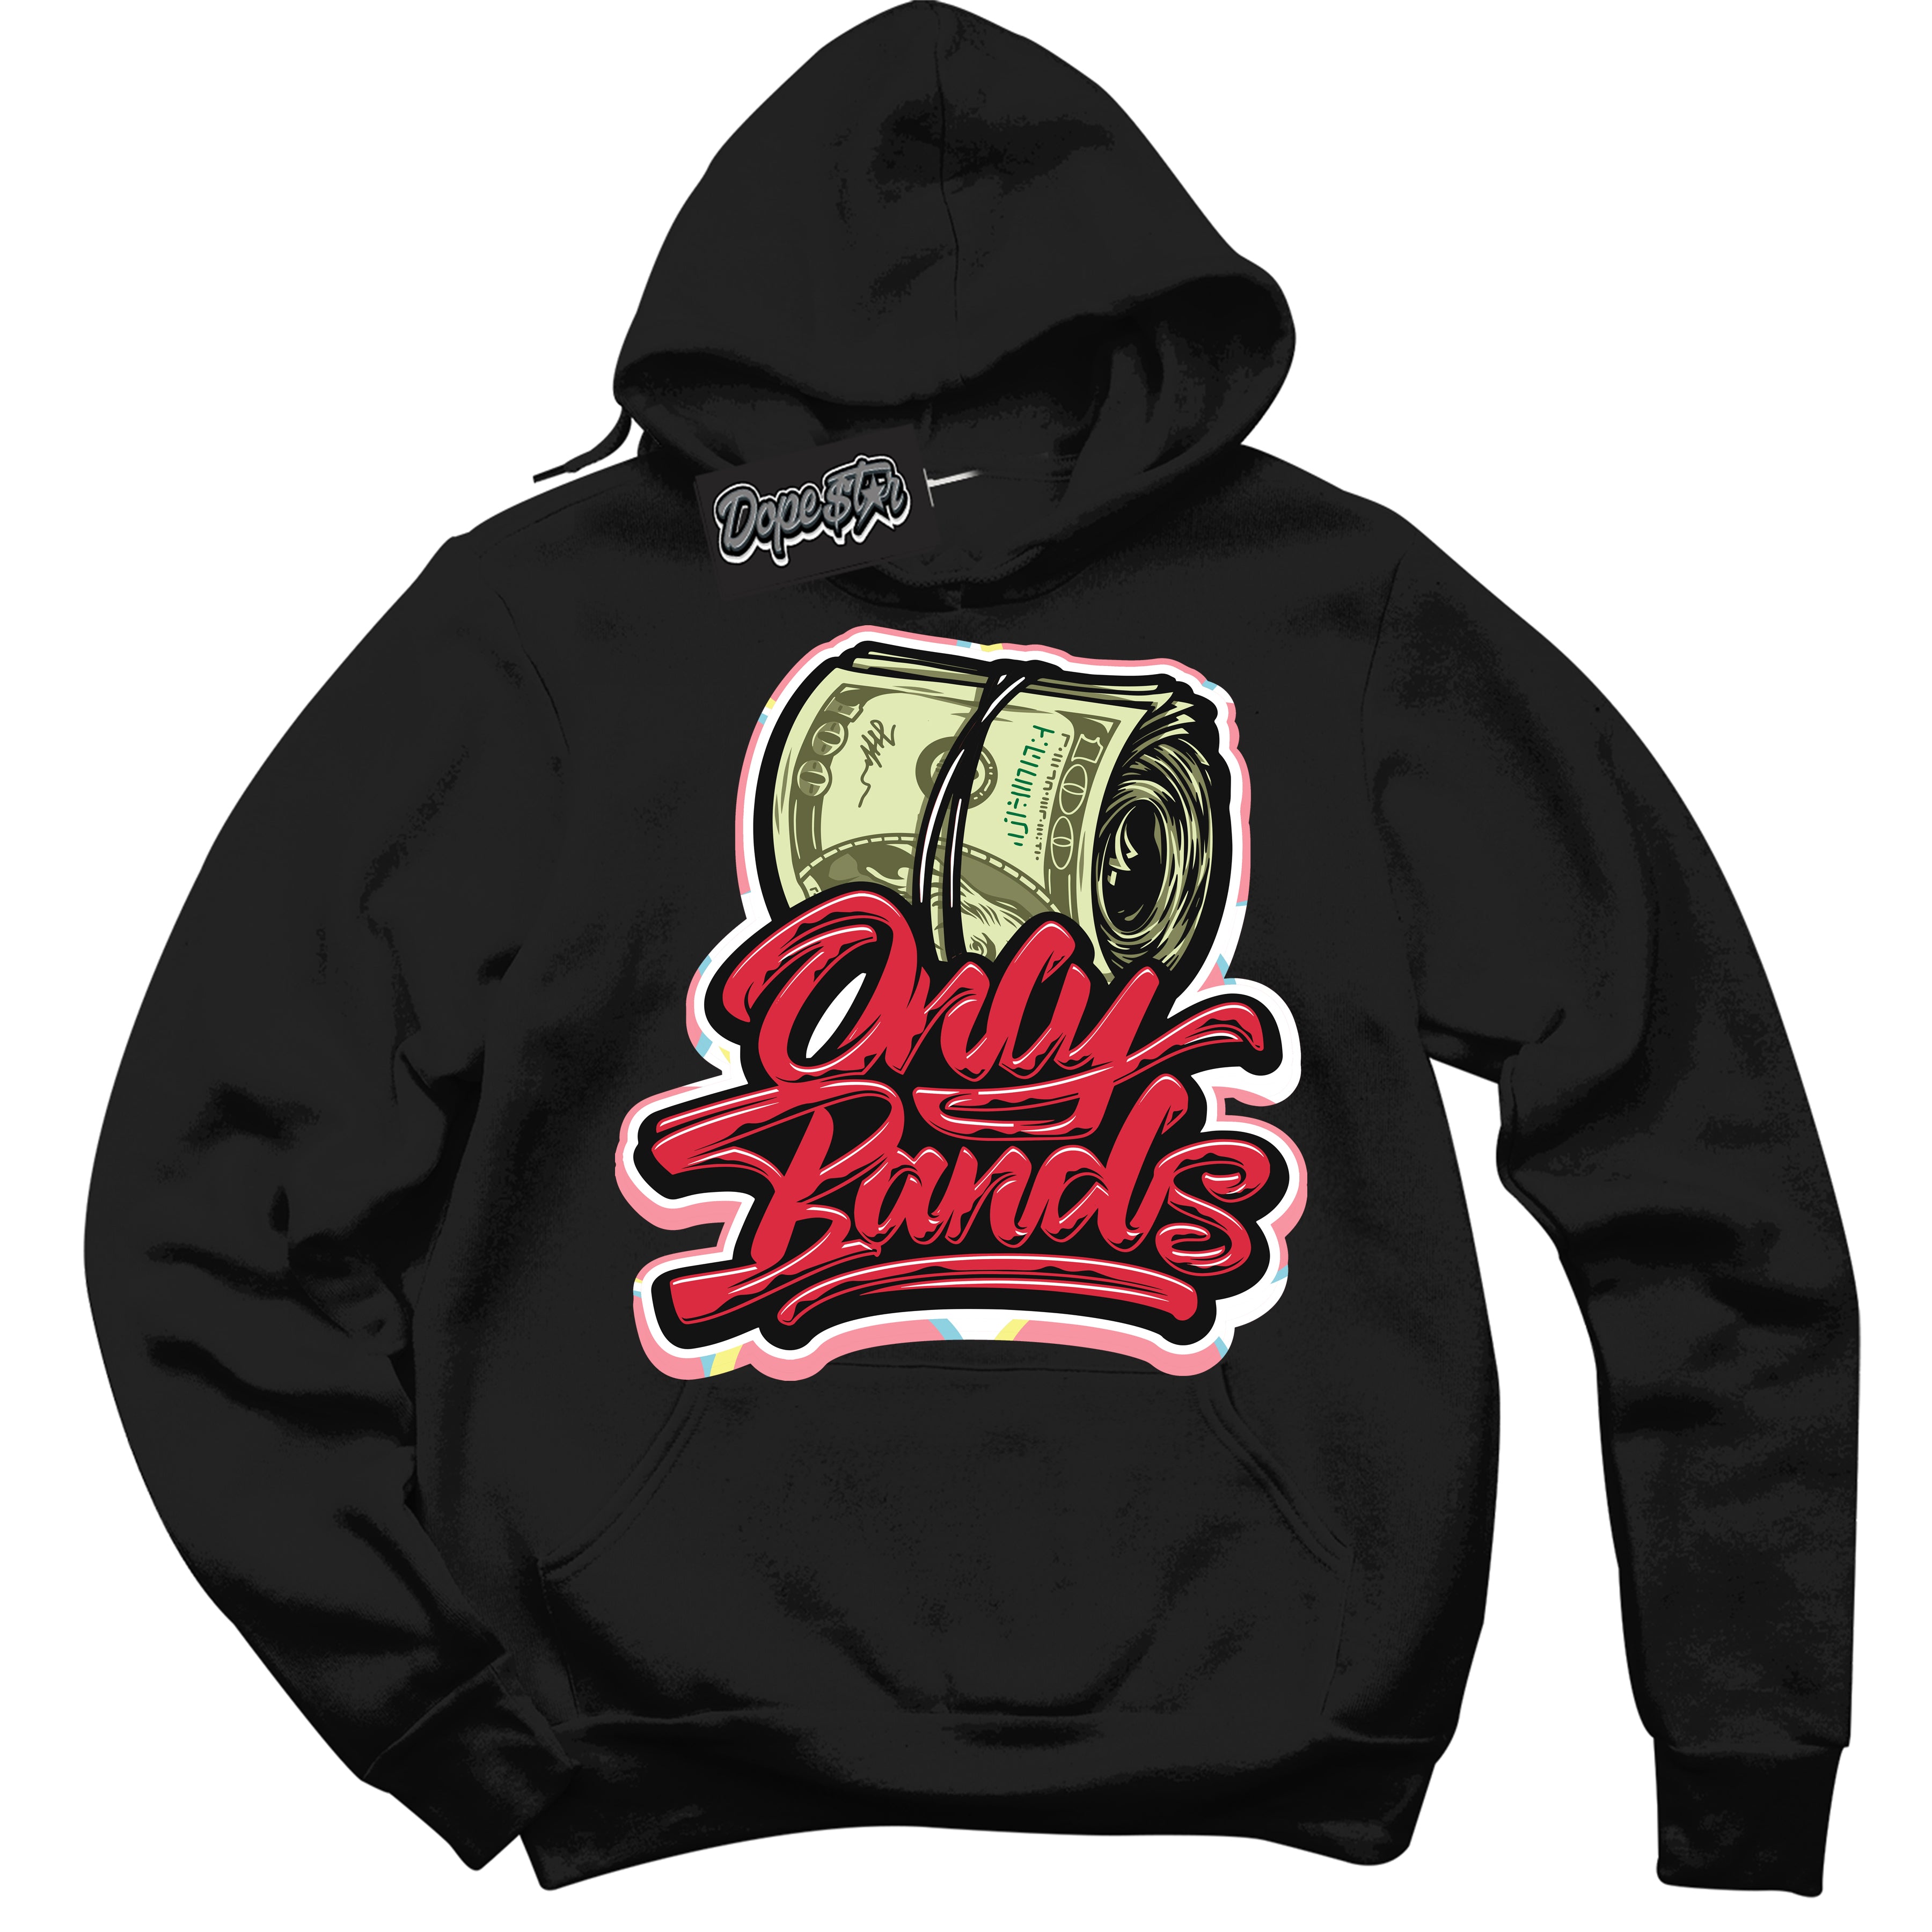 Cool Black Graphic DopeStar Hoodie with “ Only Bands “ print, that perfectly matches Spider-Verse 1s sneakers